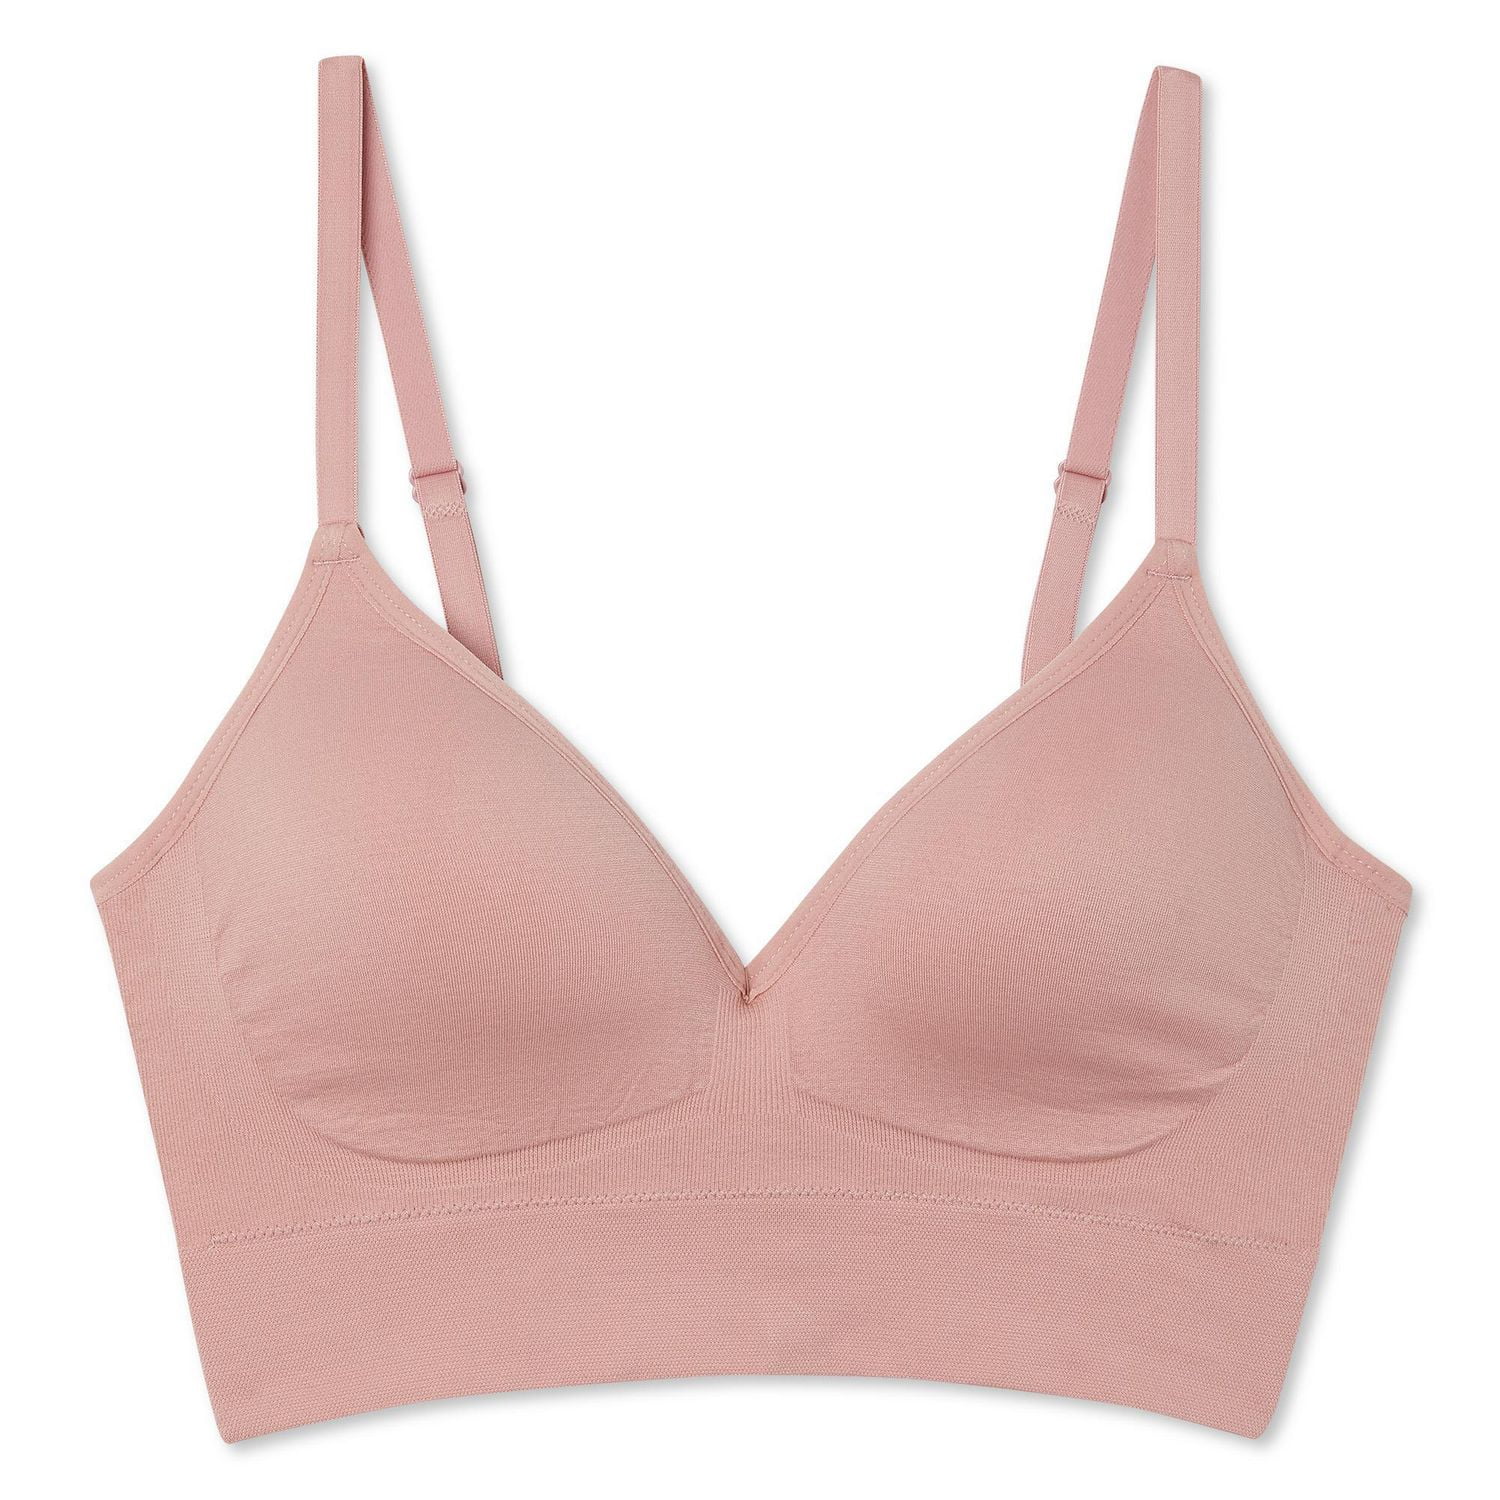 Padded Bra - Buy Padded Bras Online By Price, Size & Color – tagged Grey